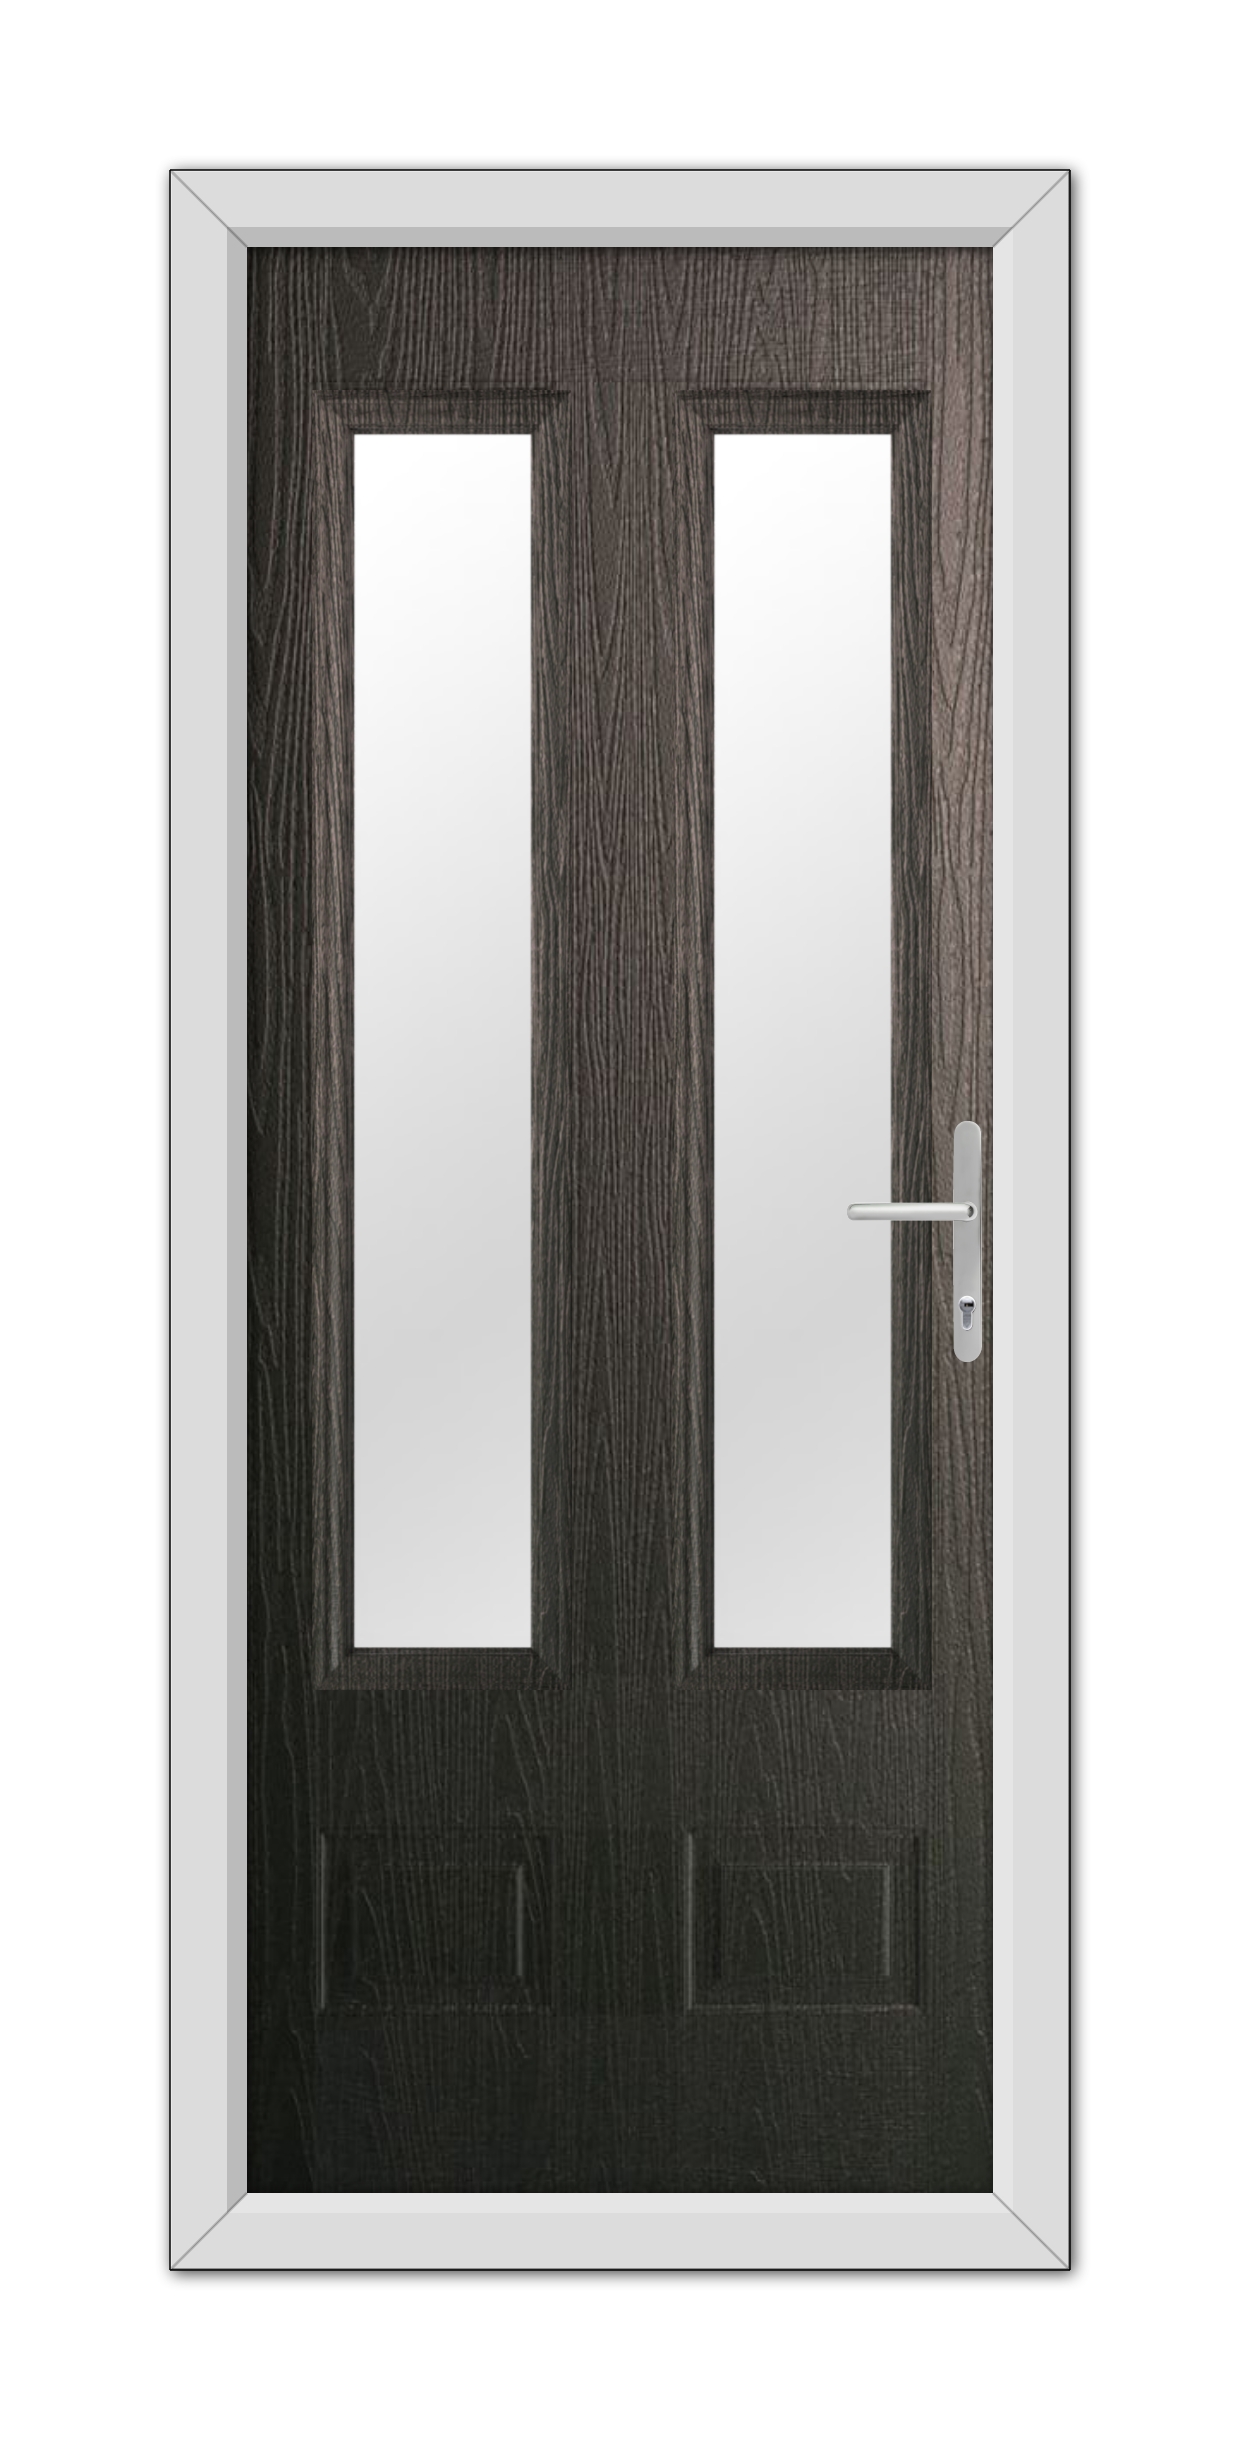 Schwarzbraun Aston Glazed 2 Composite Door 48mm Timber Core with two vertical glass panels and a metallic handle, set in a white frame, isolated on a white background.